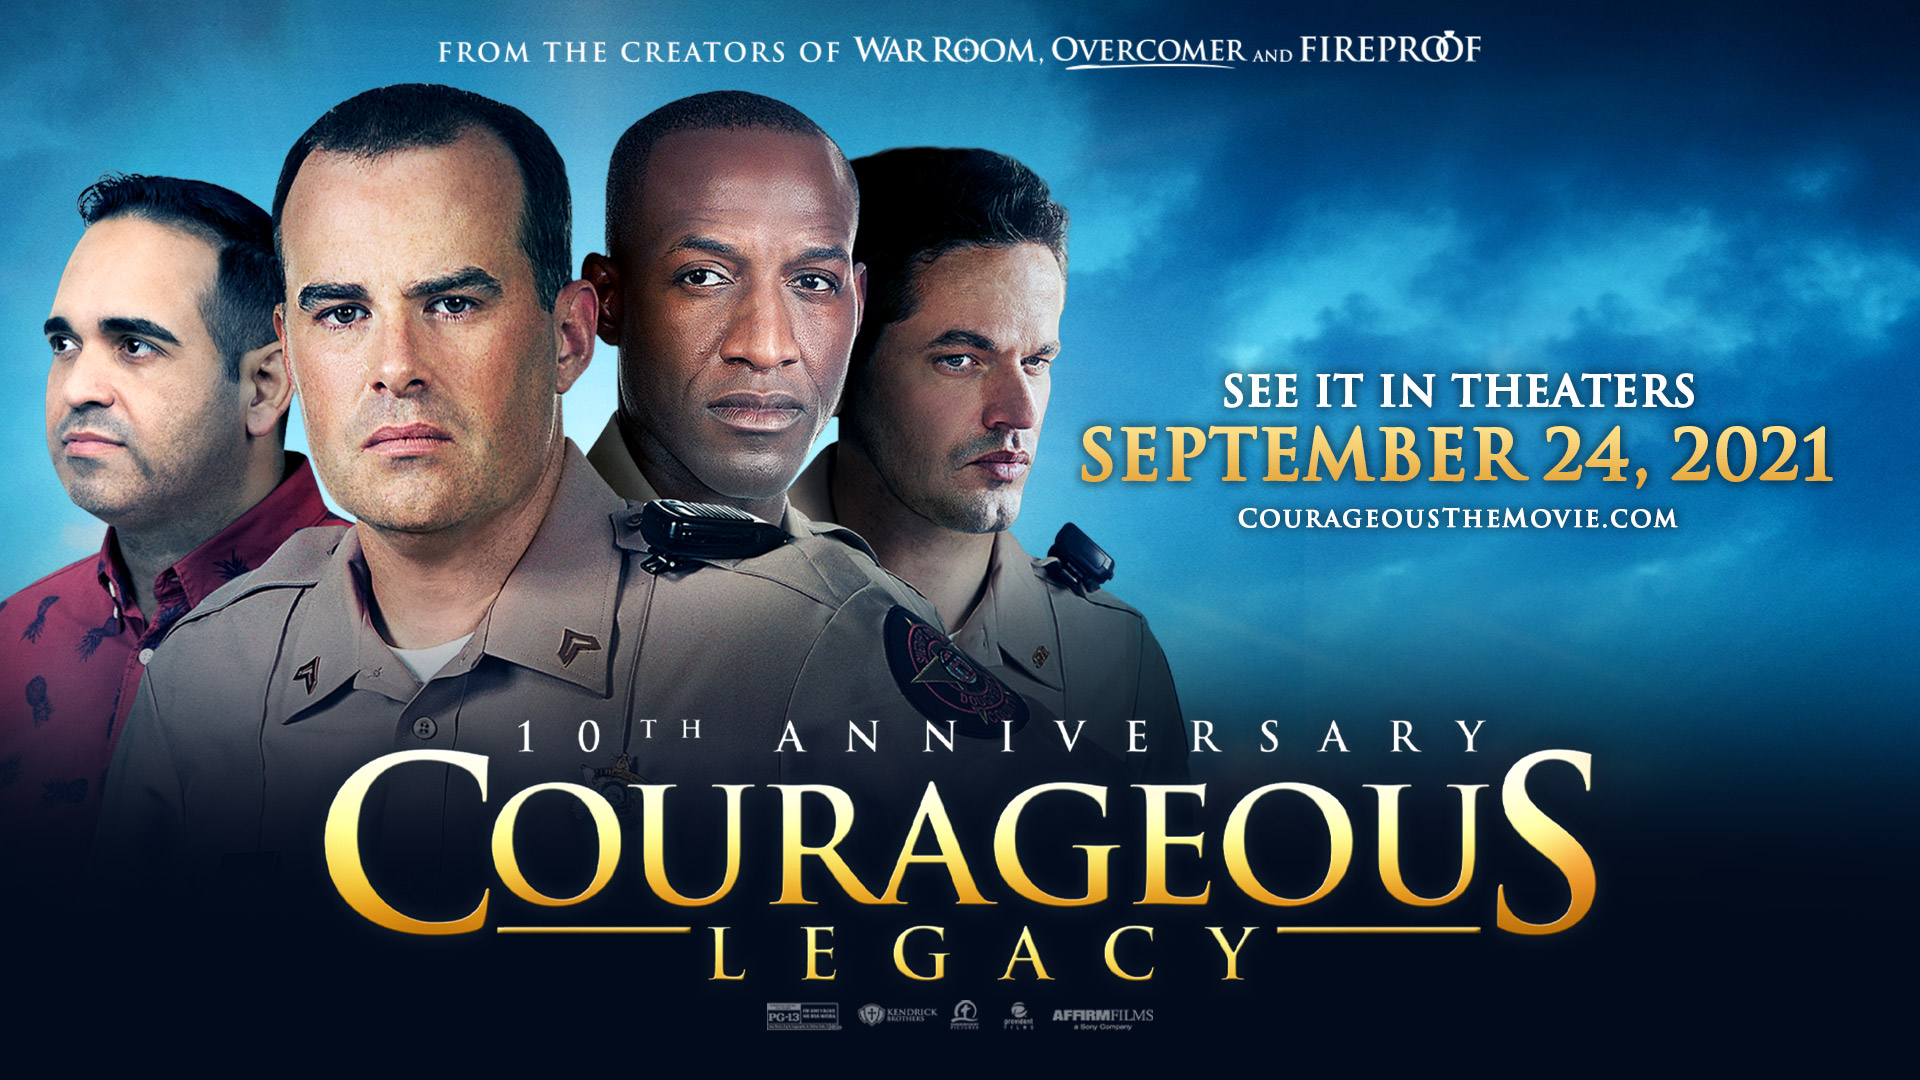 Courageous Legacy